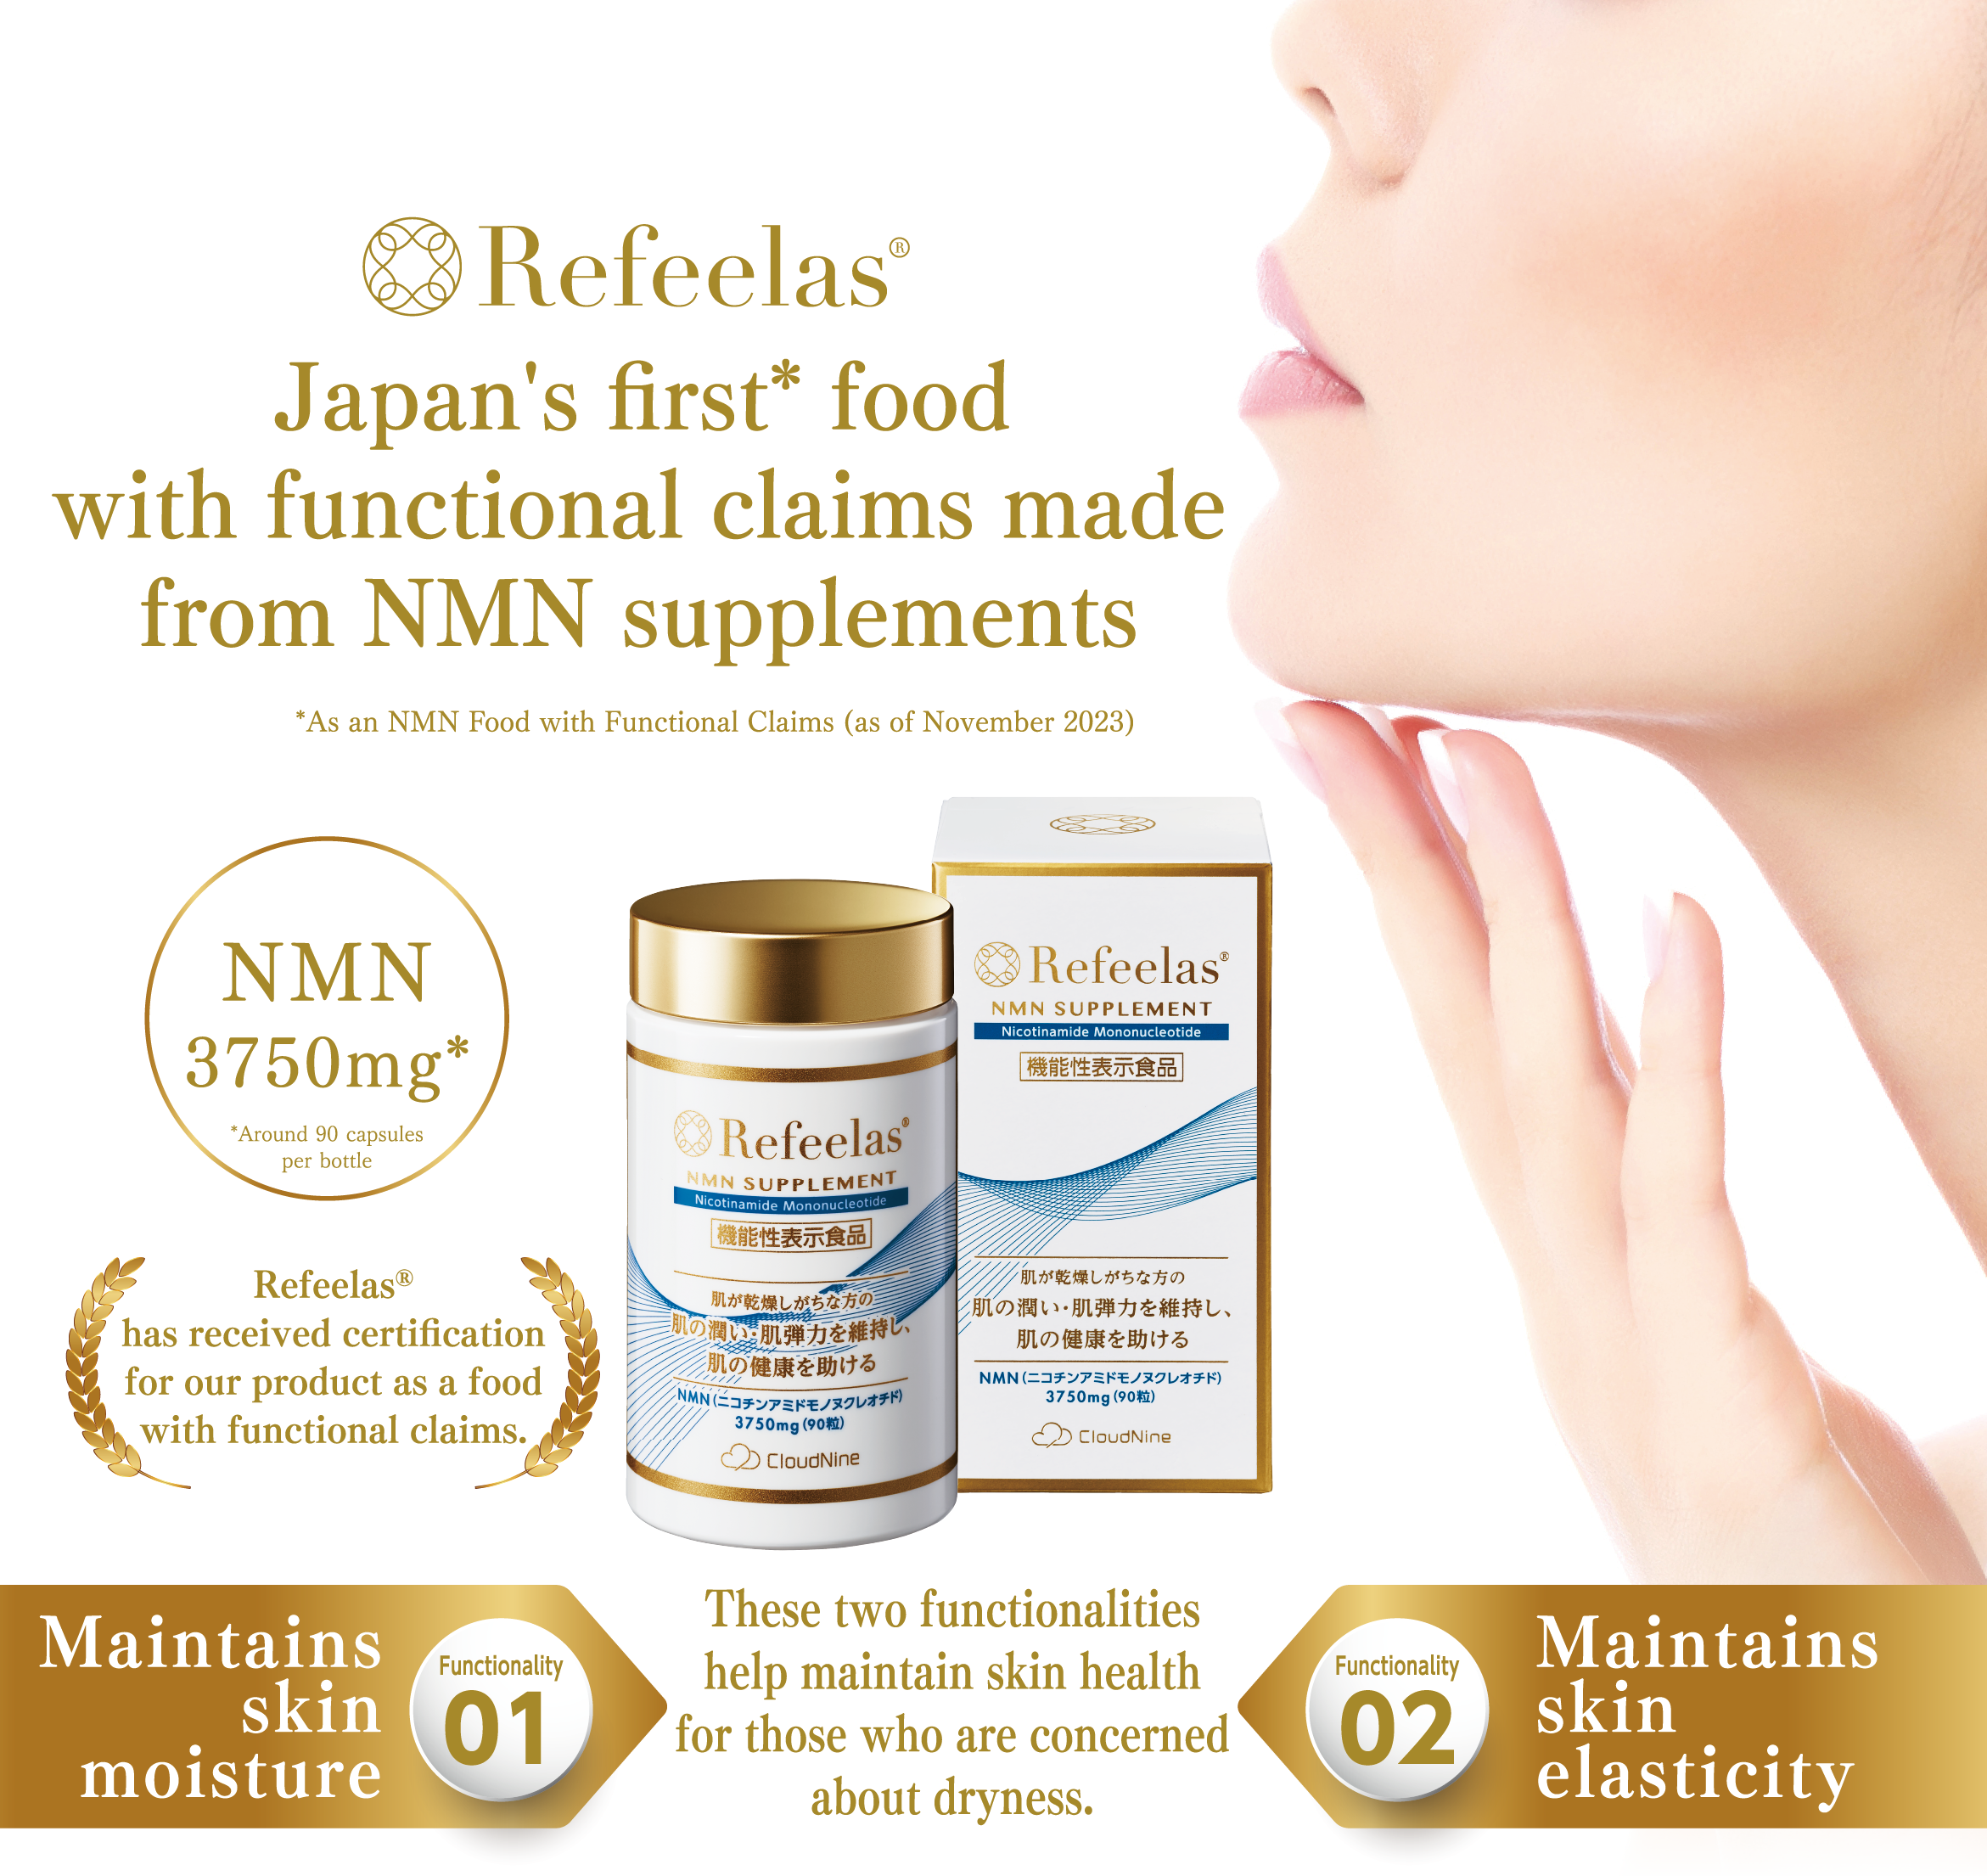 NJapan's first* food with functional claims made from NMN supplements *As an NMN Food with Functional Claims (as of November 2023)